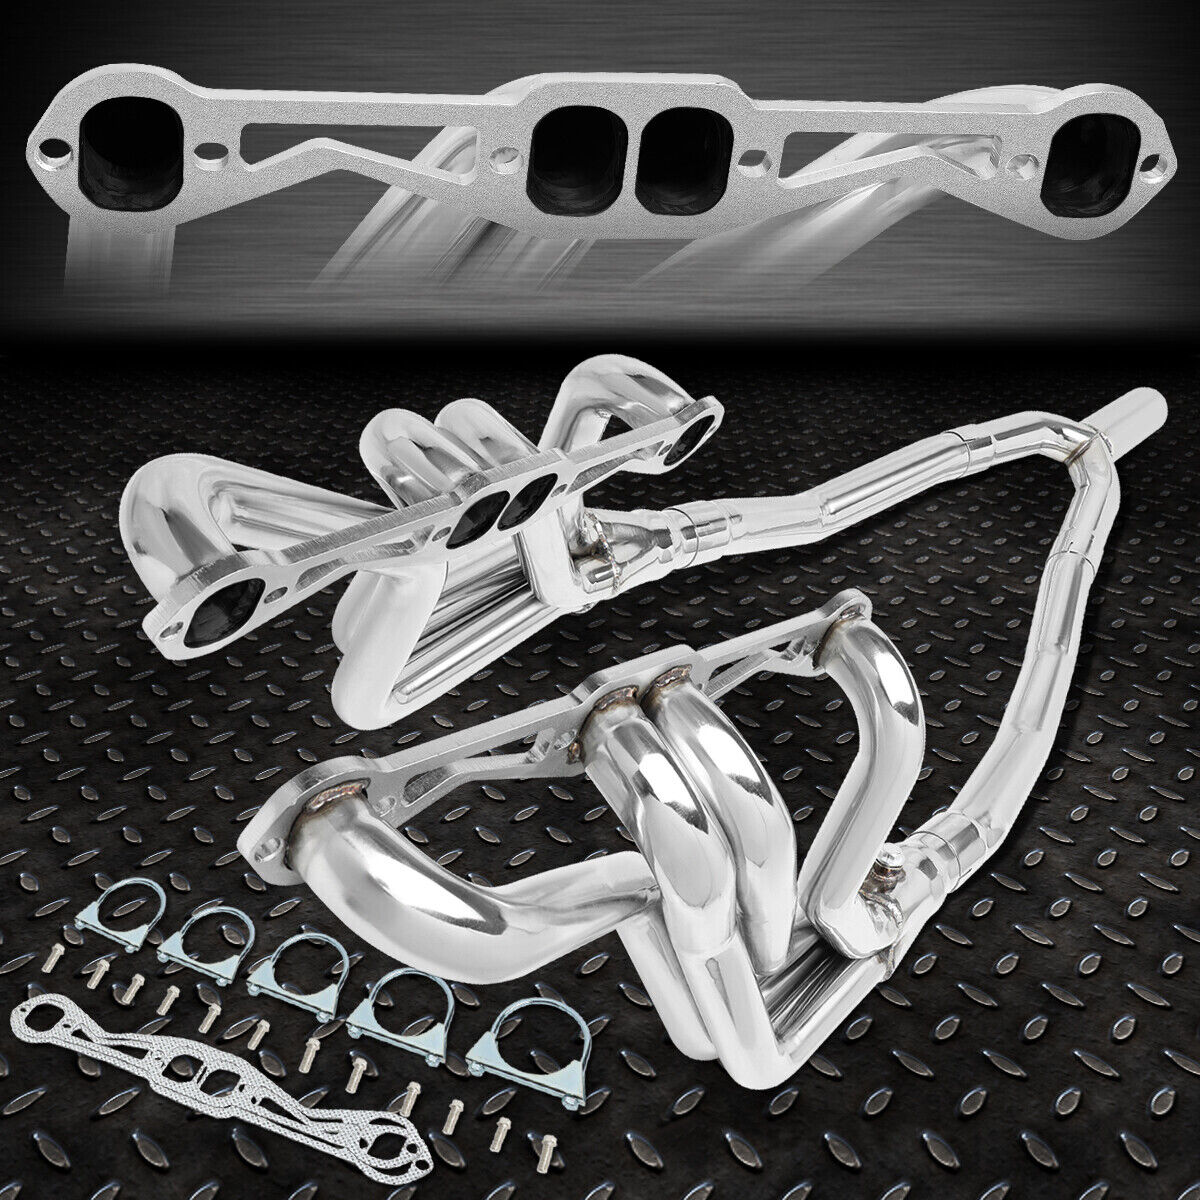 For 82-92 Camaro/Firbird V8 Sbc Automatic At Stainless Tri-Y Exhaust Header